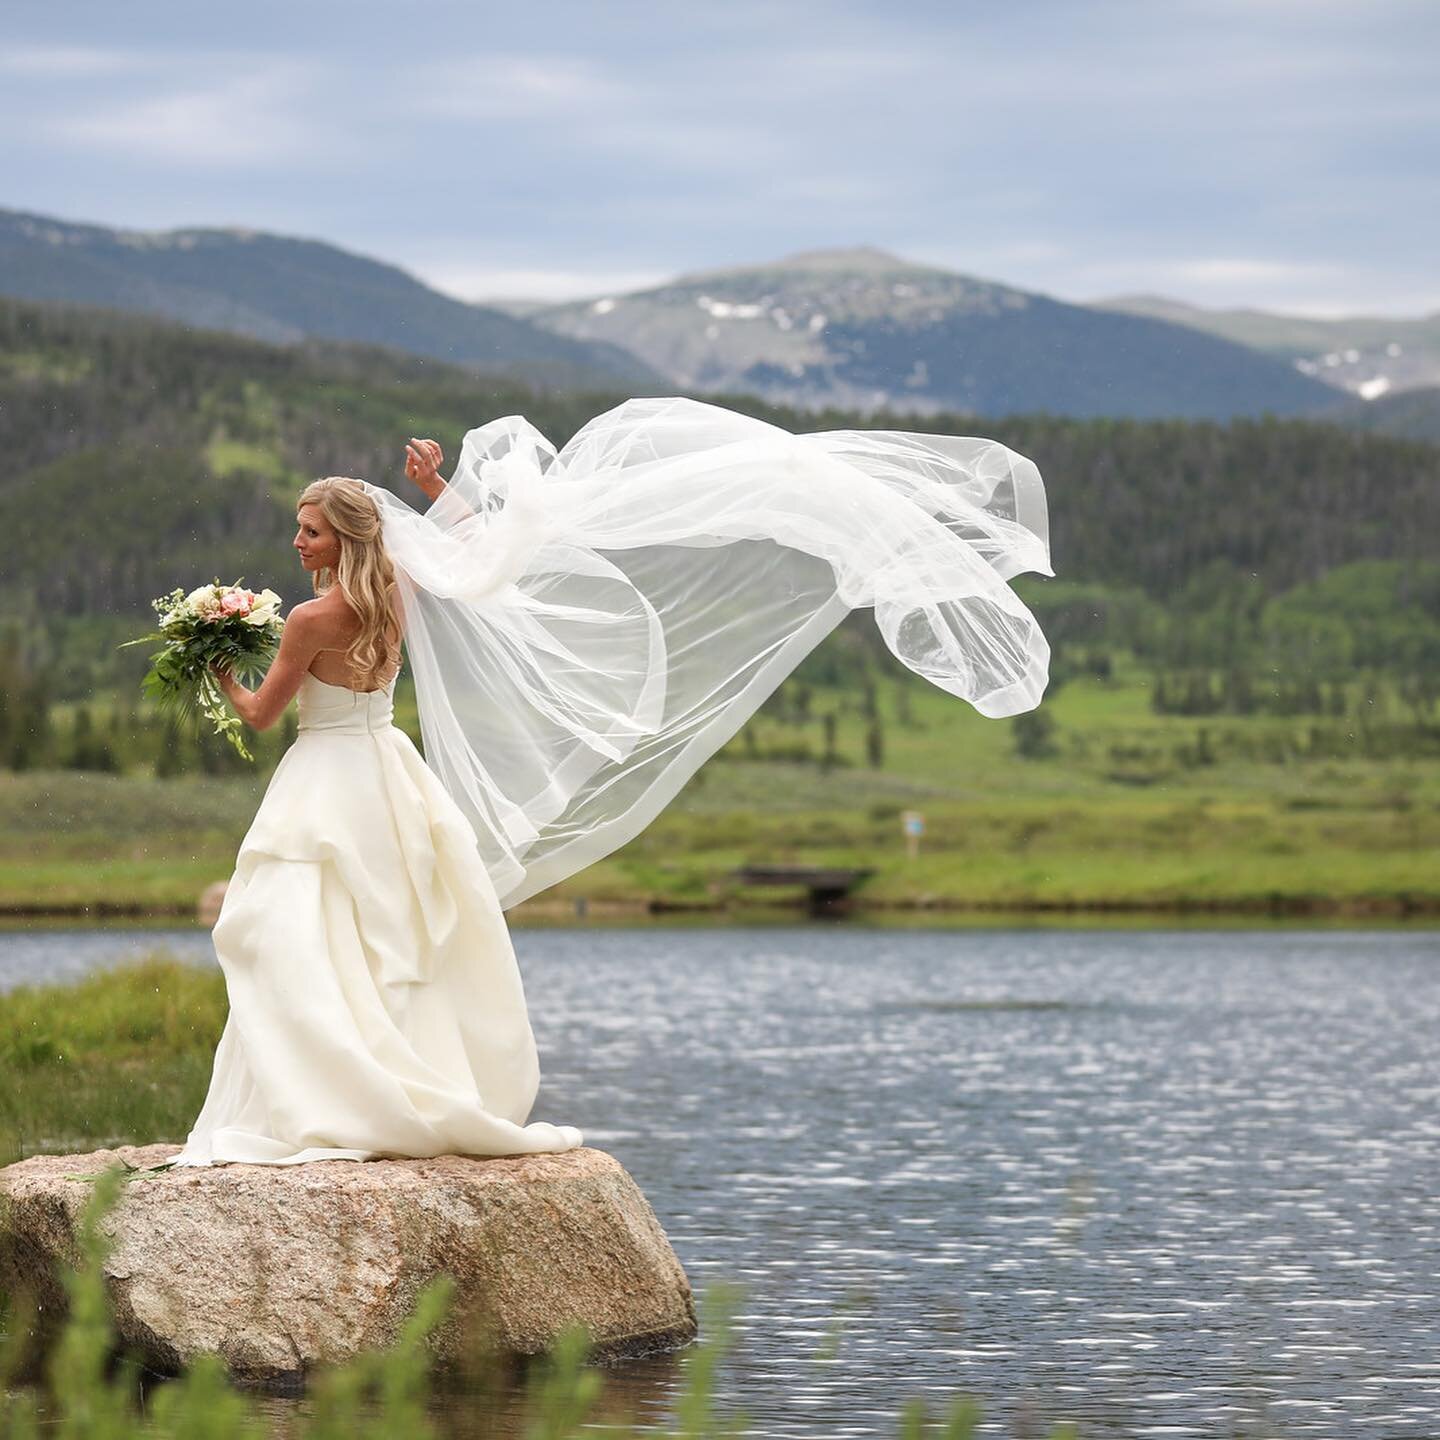 Happy Anniversary my love. @cbarbs973 

It&rsquo;s been such a full two years I&rsquo;m only just now posting images from one of the most incredible weekends of my life.  @devilsthumbranchweddings 

These image capture the start of a new chapter, one